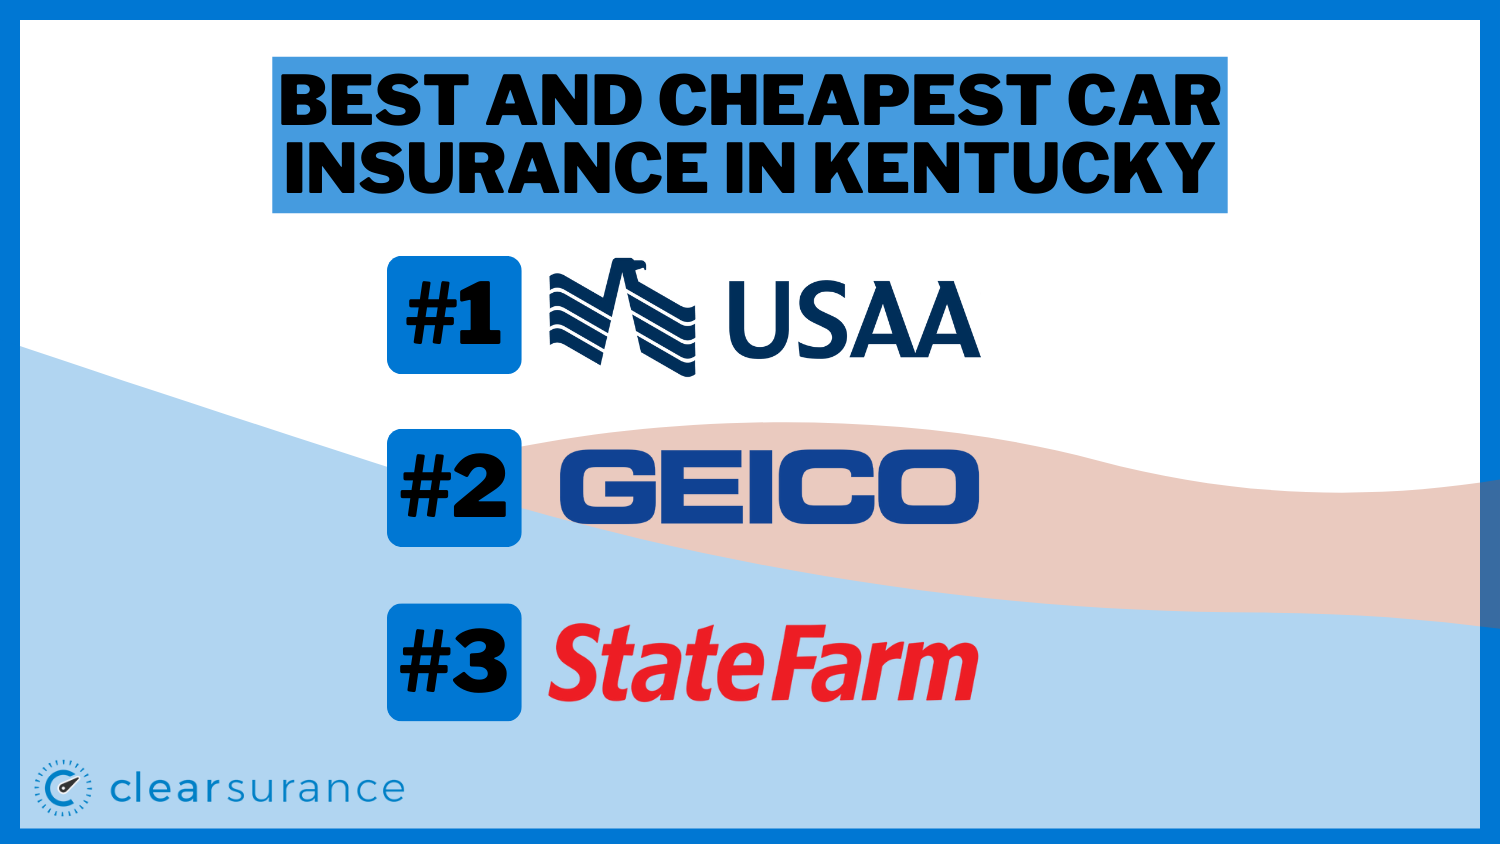 Best and Cheapest Car Insurance in Kentucky